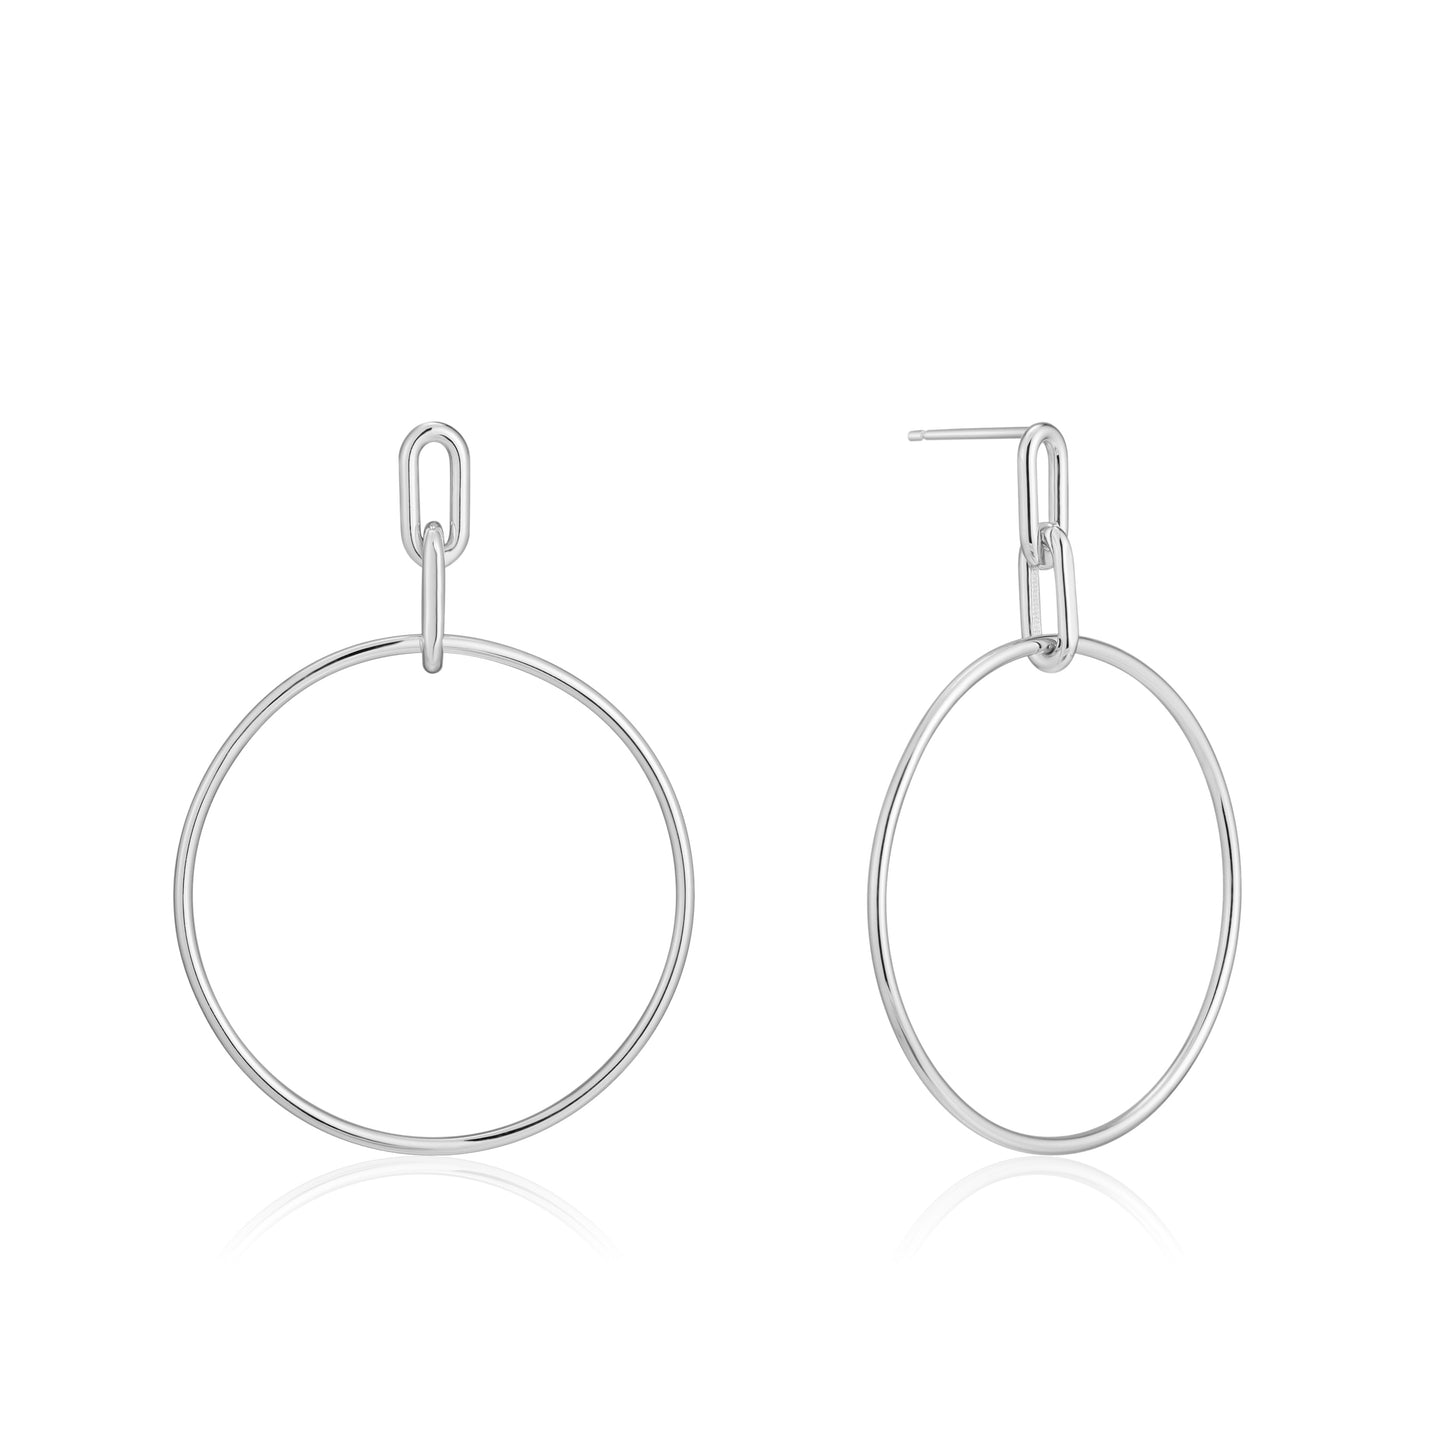 ANIA HAIE ANIA HAIE - Silver Cable Link Hoop Earrings available at The Good Life Boutique